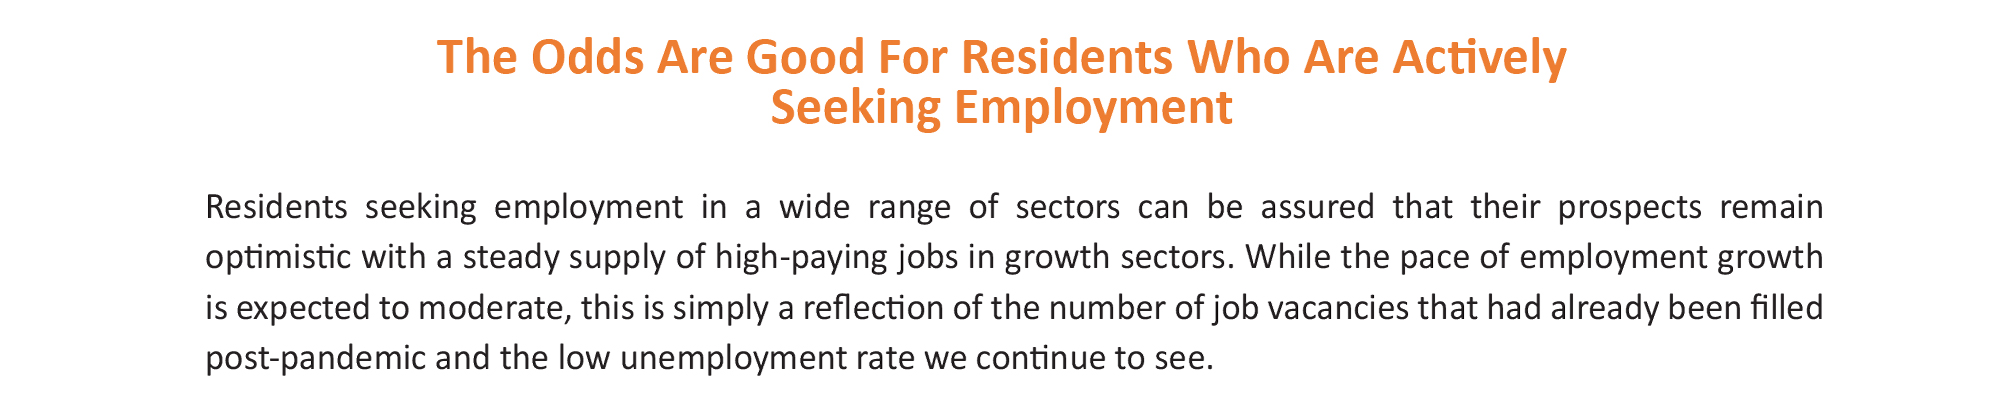 The Odds Are Good For Residents Who Are Actively Seeking Employment